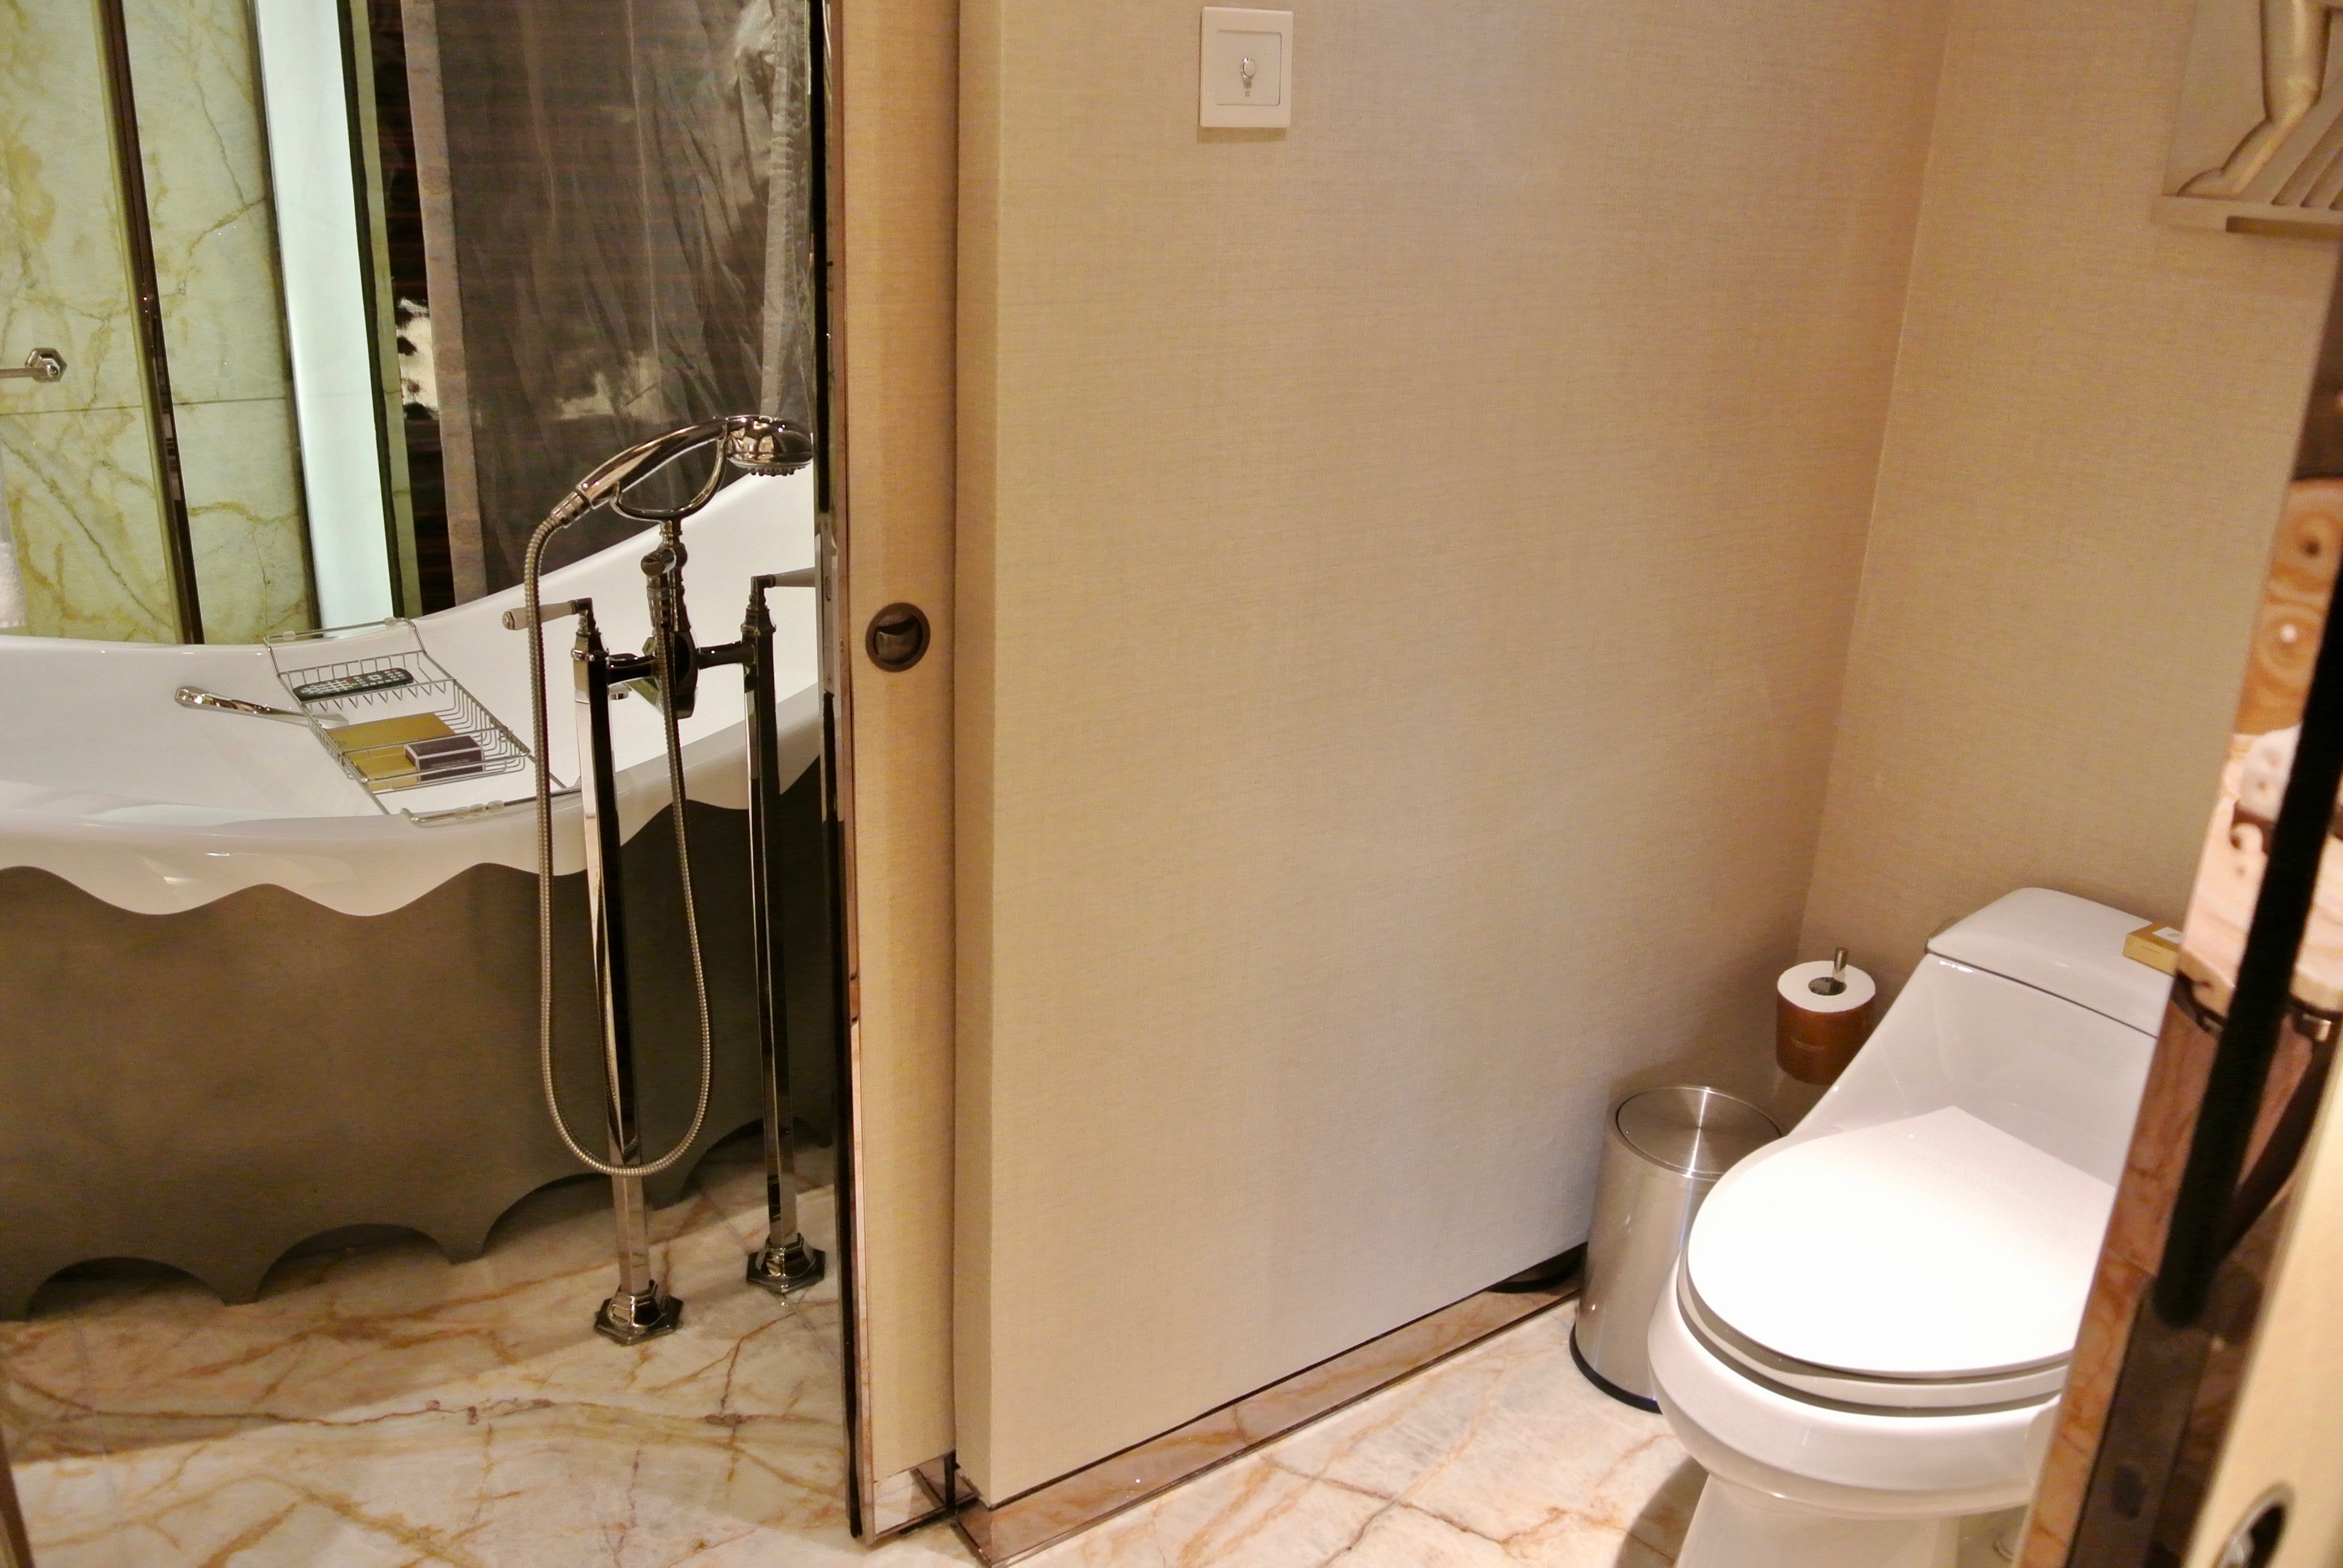 Toilet with access to bathroom or guest bathroom option